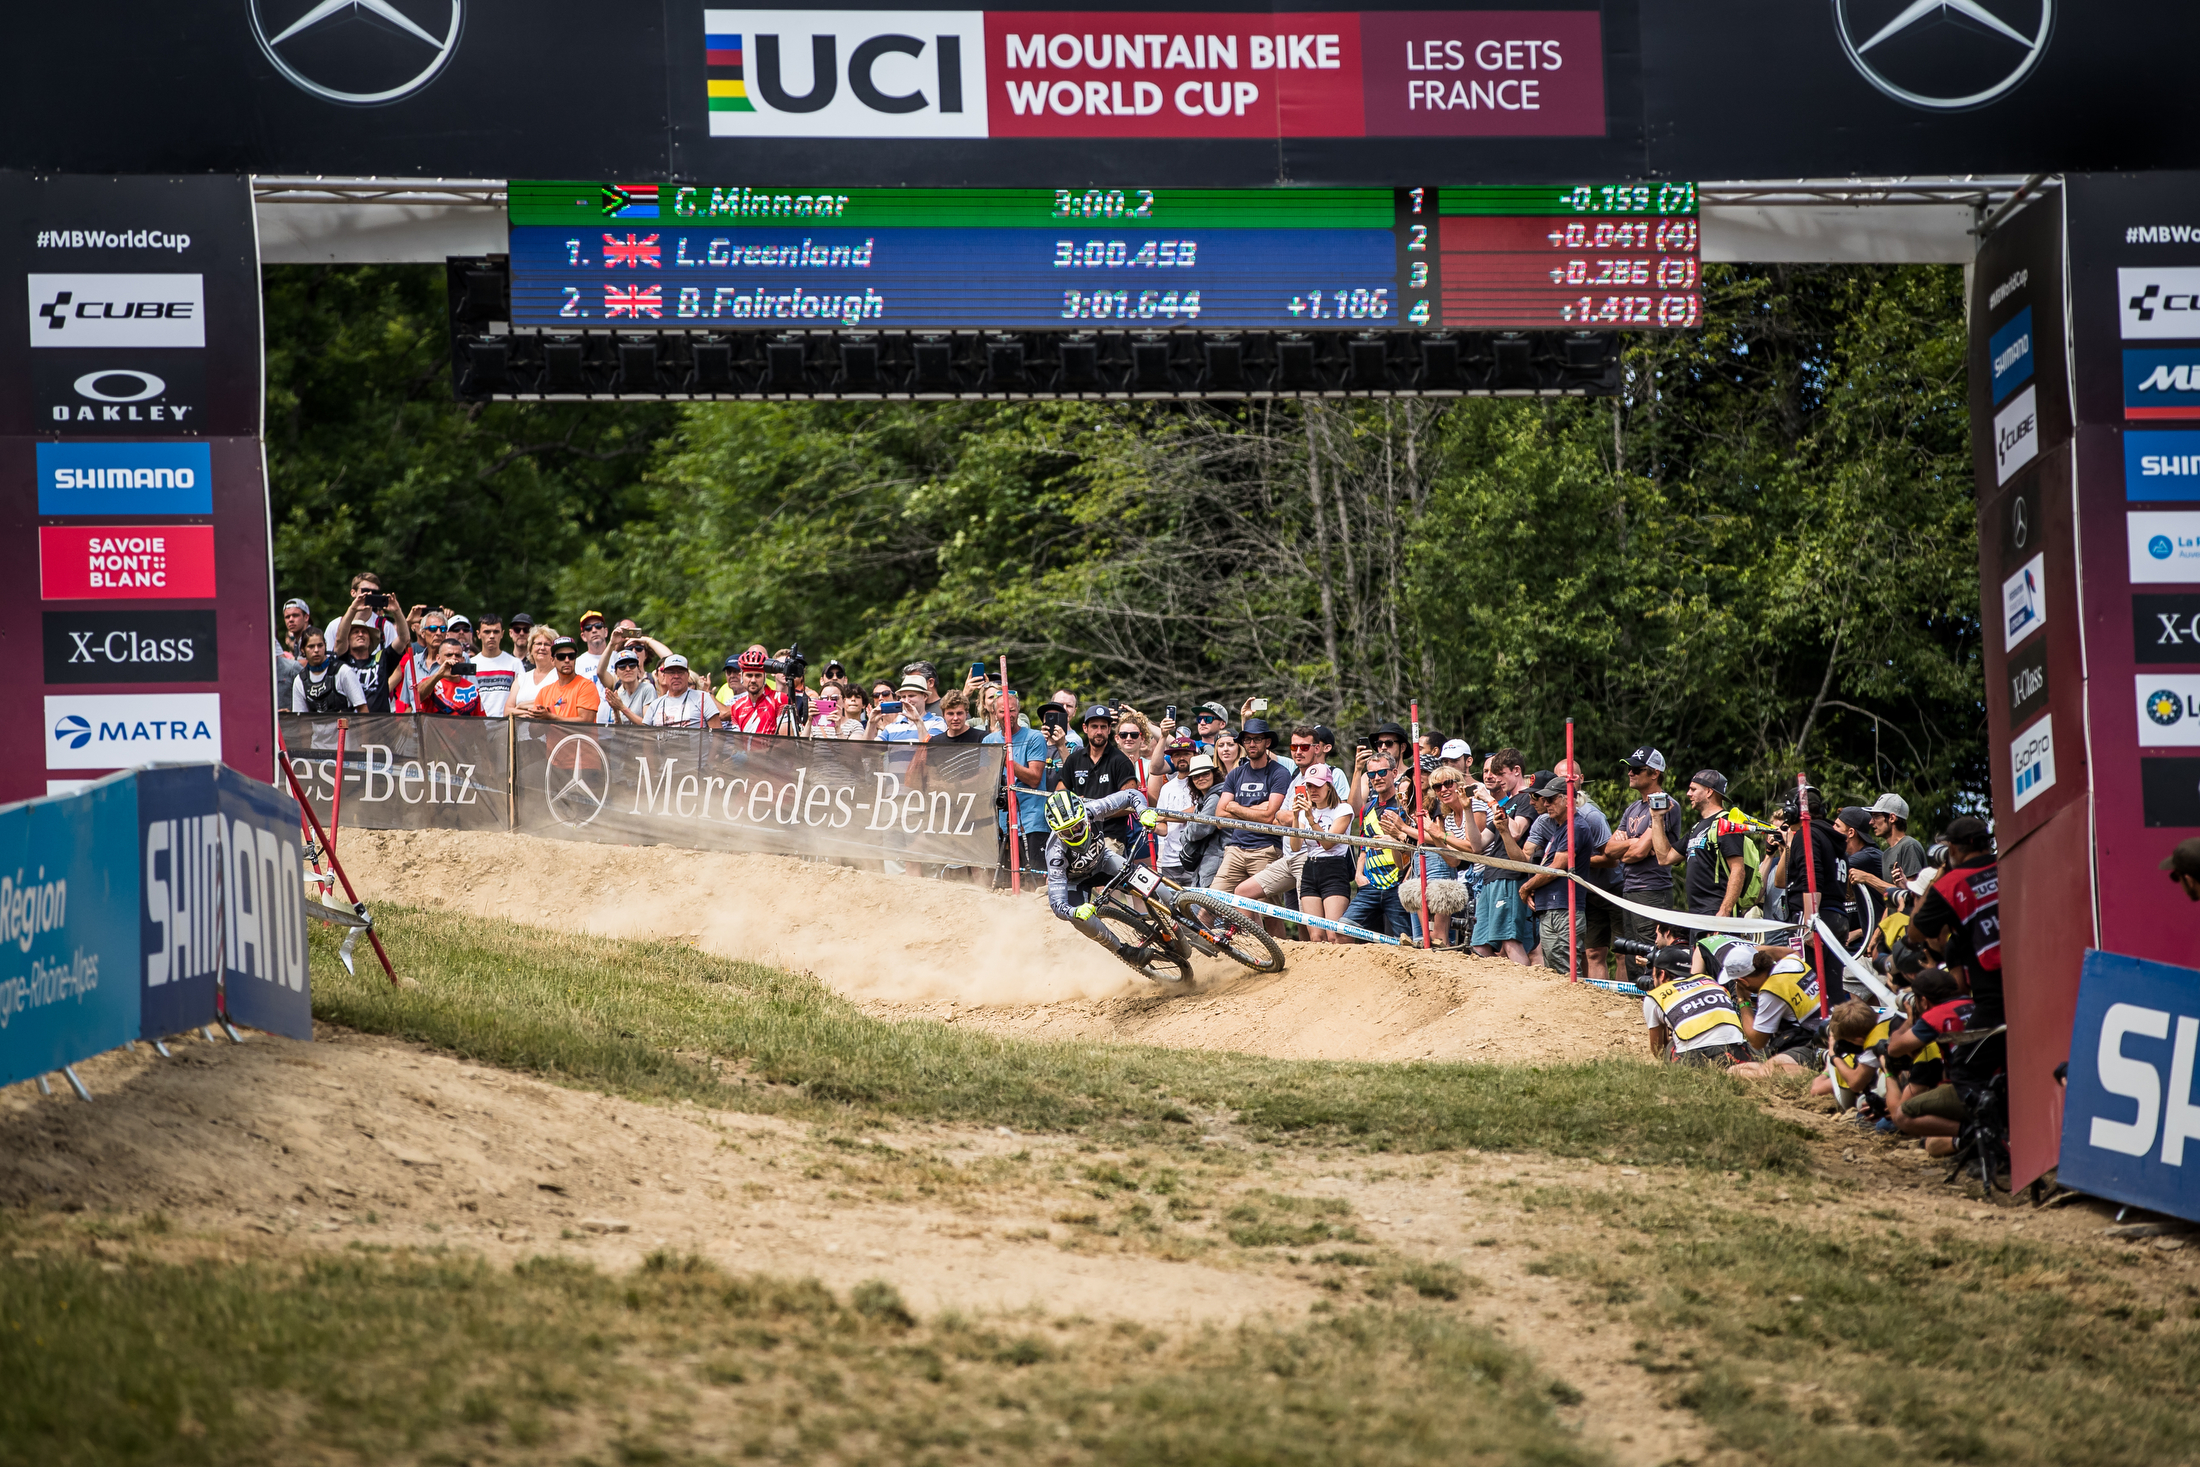 Greg Minnaar banks it in hard through the final berm with his name in green on the board for the moment.